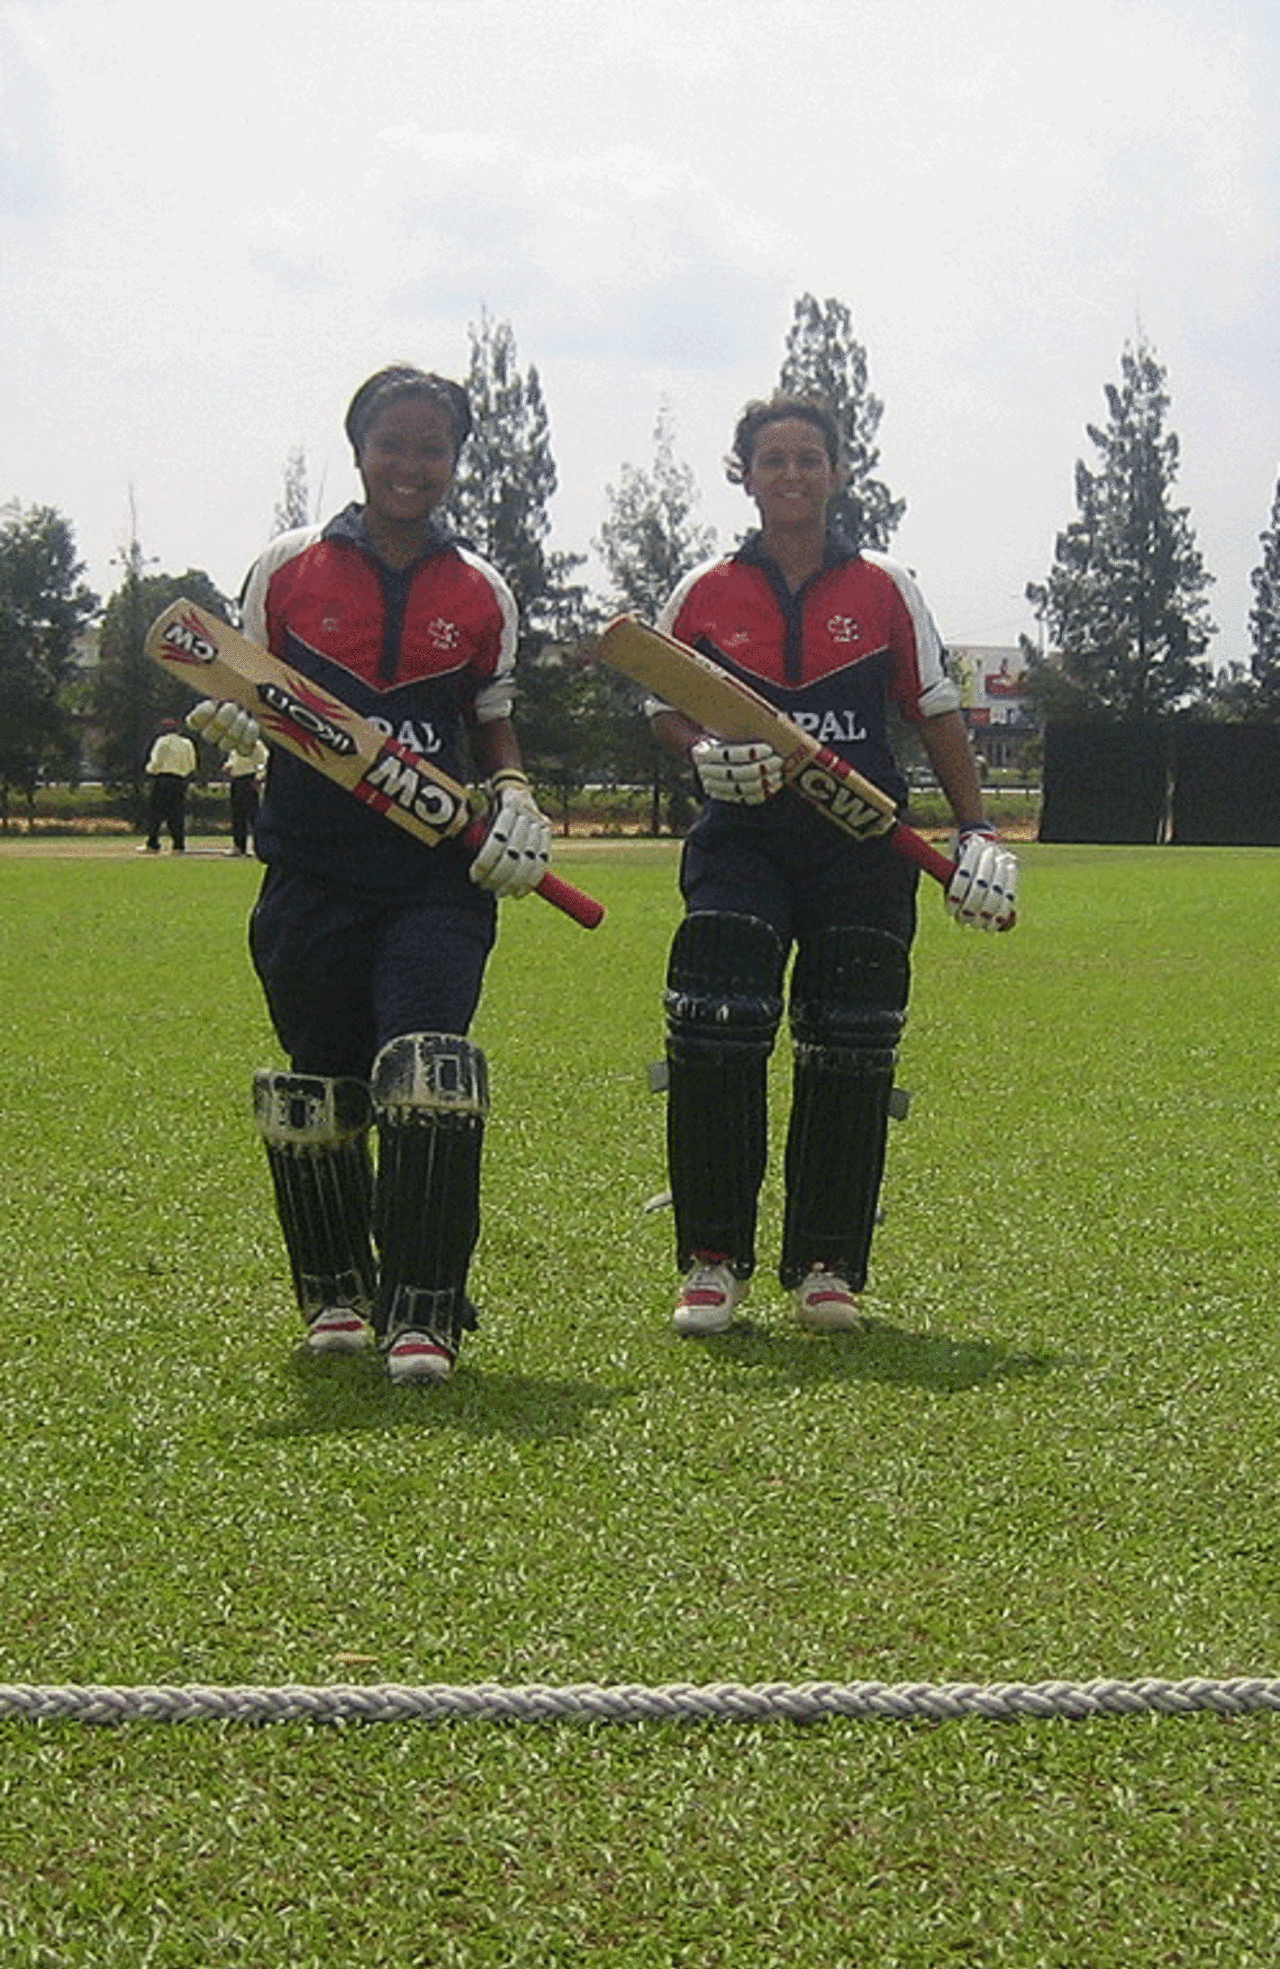 Nary Thapa (left) and Neera Rajopadhyay walk out of the ground after winning the game for Nepal against Hong Kong, Hong Kong women v Nepal women, ACC women's tournament, Johor, July 15, 2007